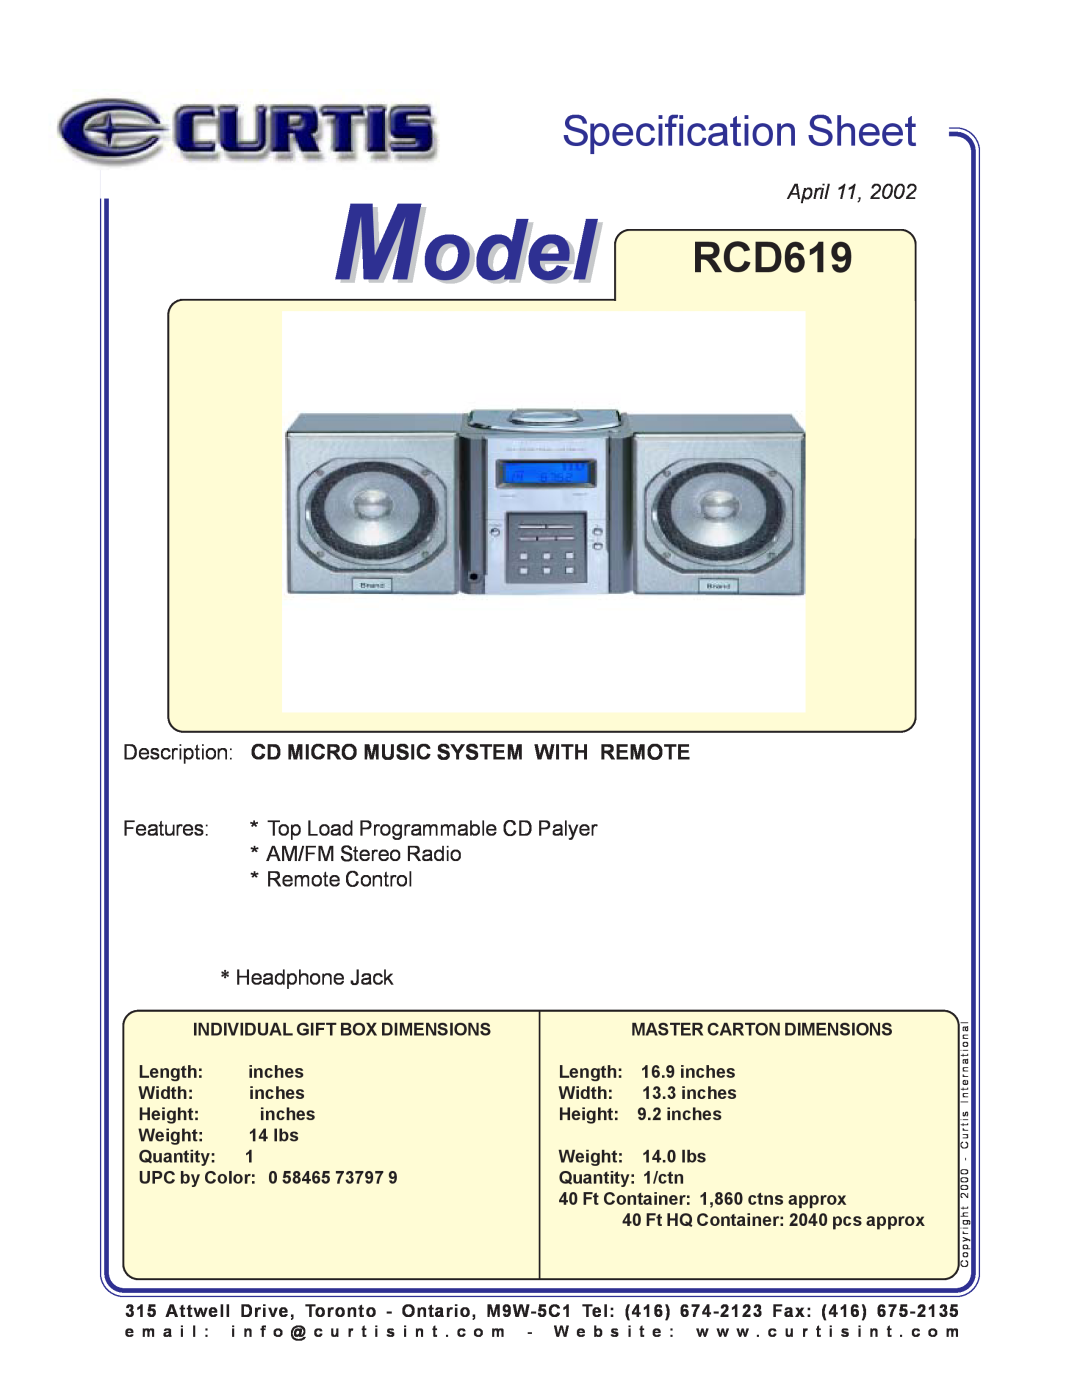 Curtis specifications Specification Sheet, Model RCD619, April, Place Image Here, Features 